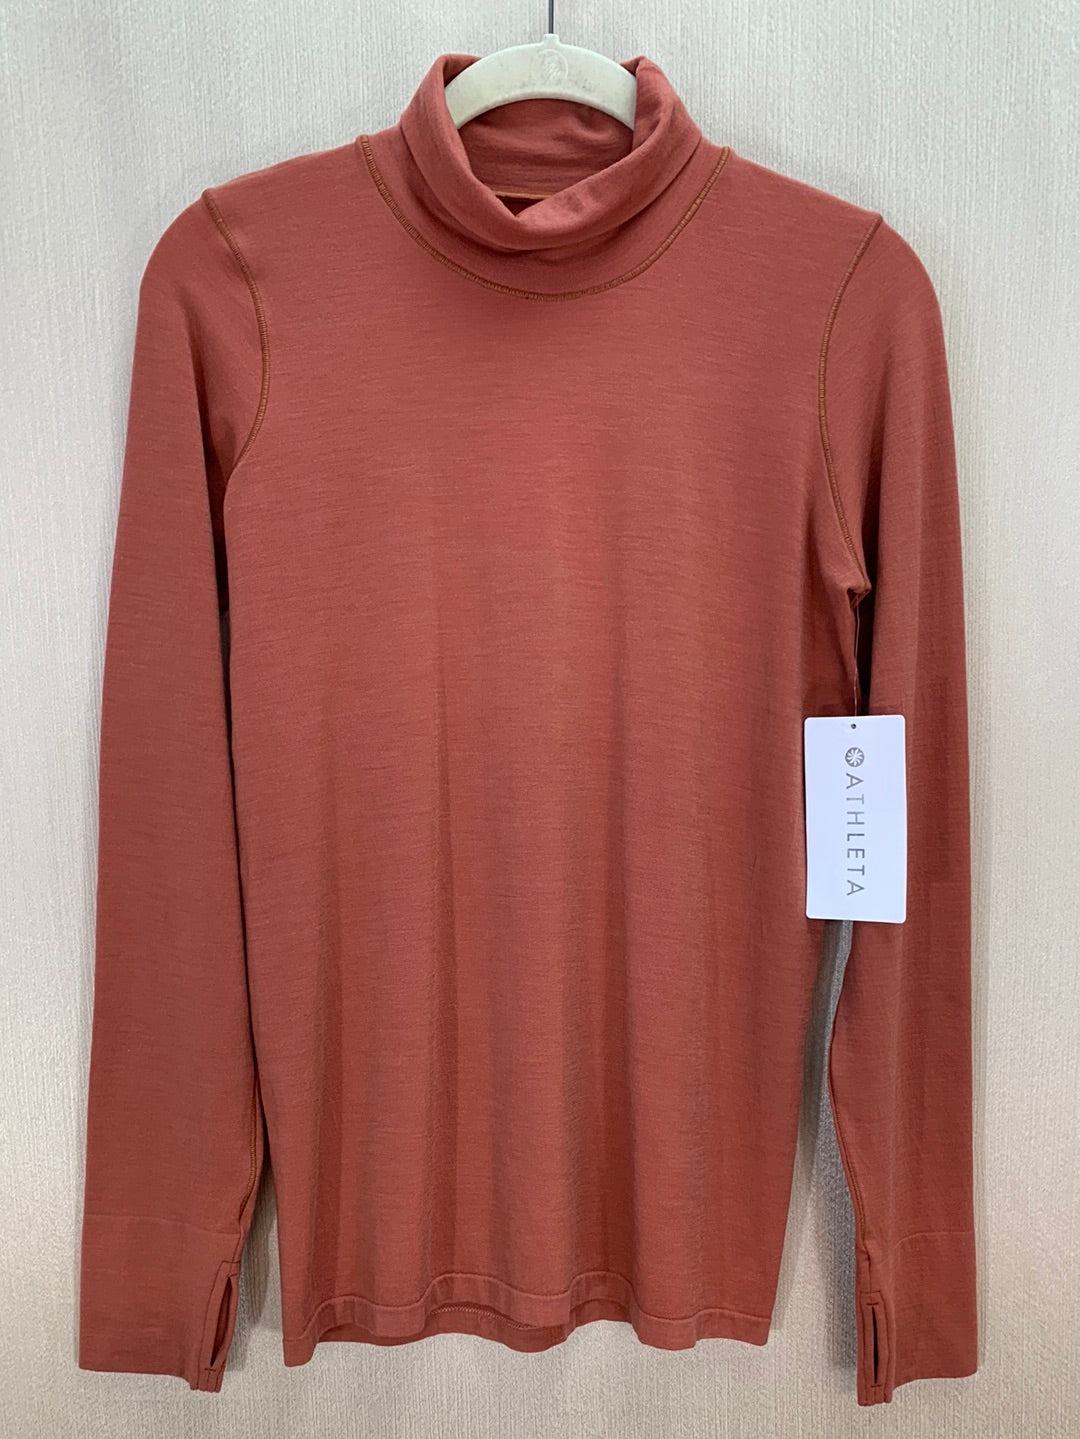 NWT - ATHLETA etruscan red Wool Blend Foresthill Ascent Turtleneck - L